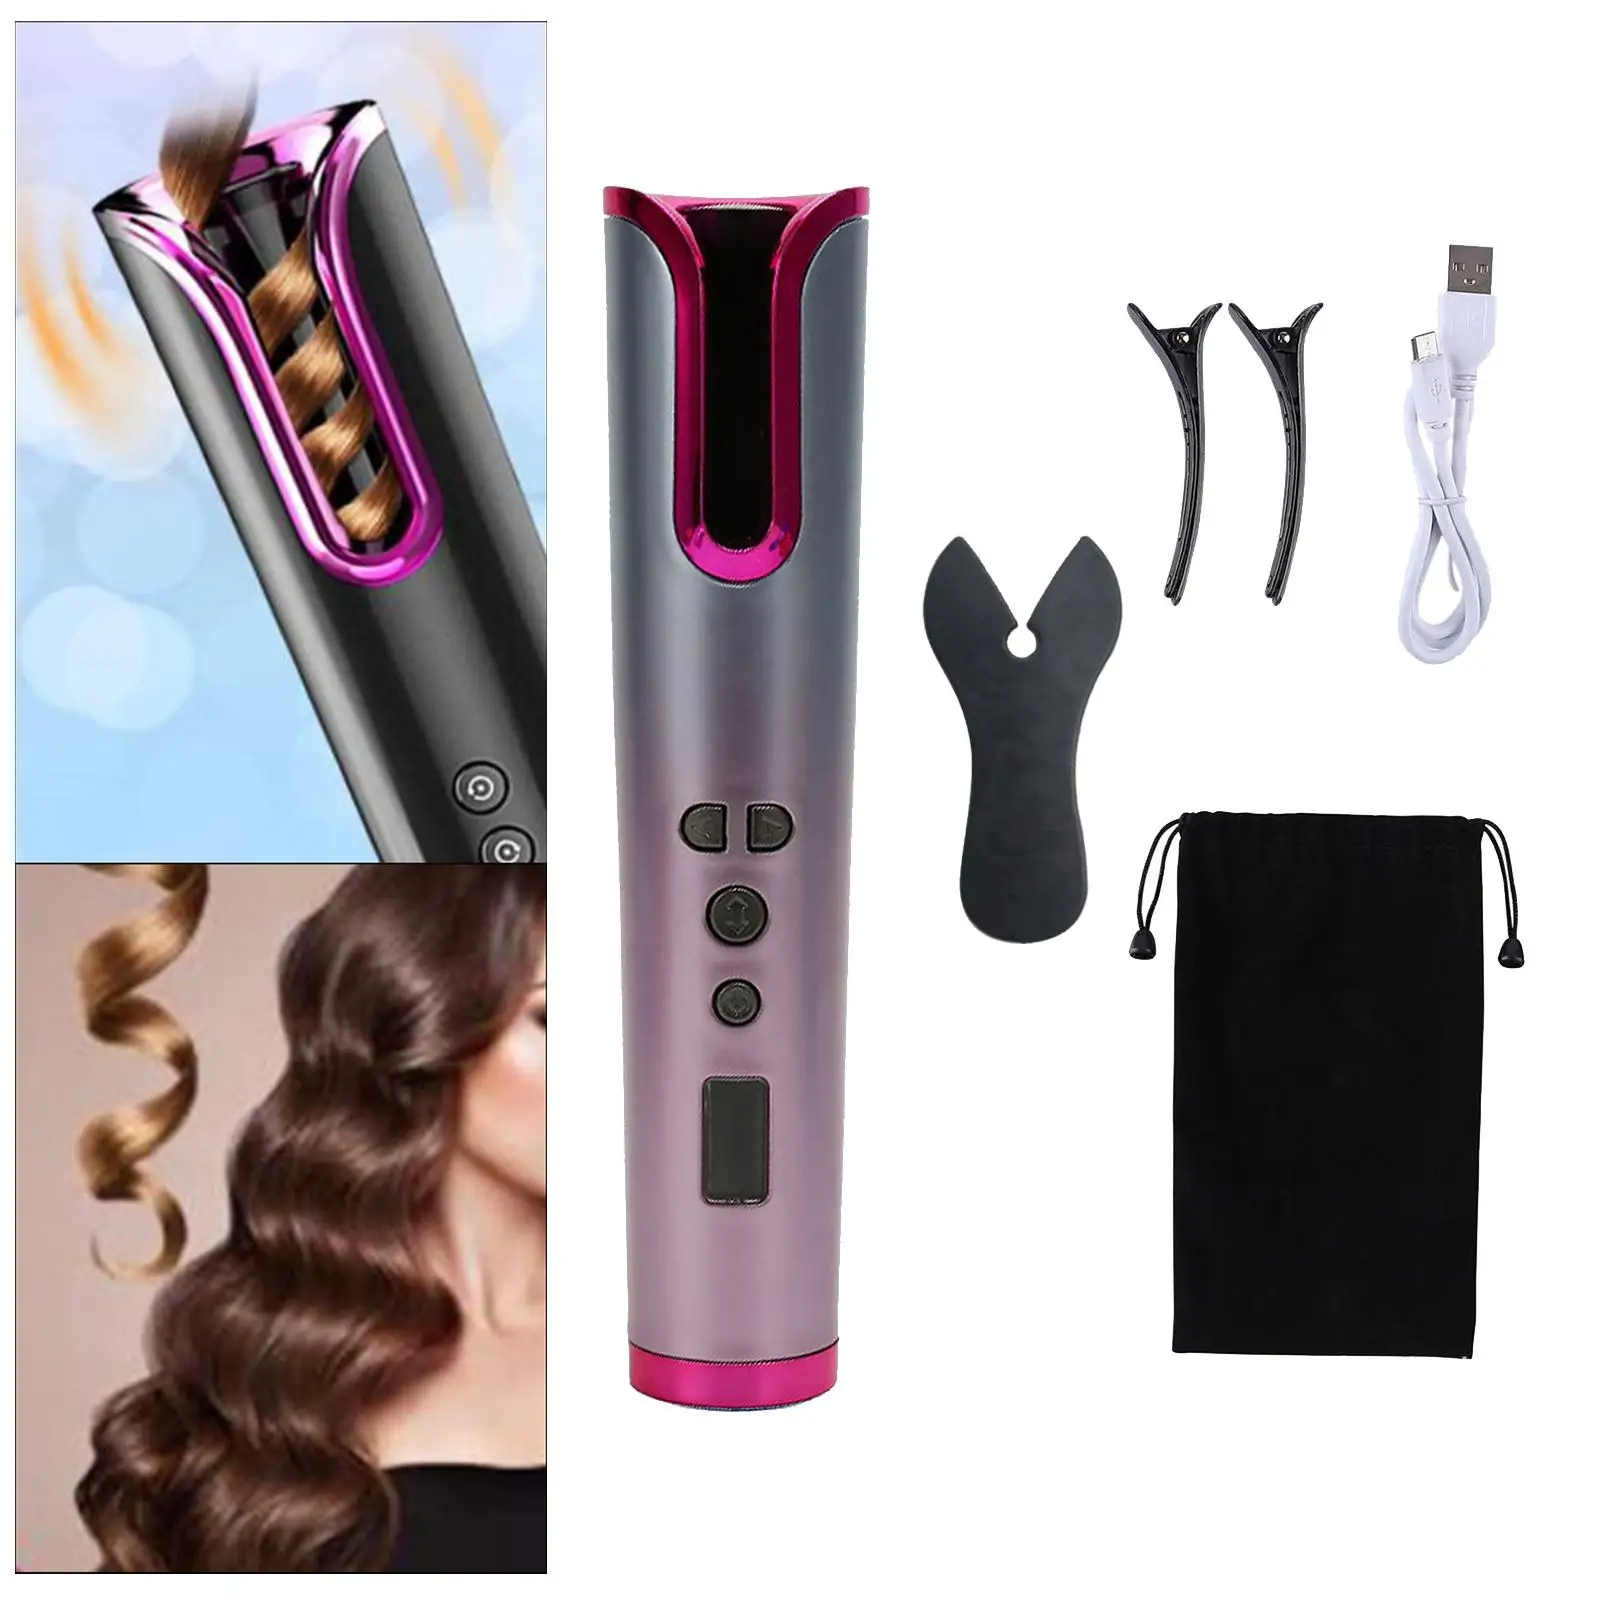 Cordless Hair Curler USB Rechargeable Automatic Curling Iron,LCD screen Display